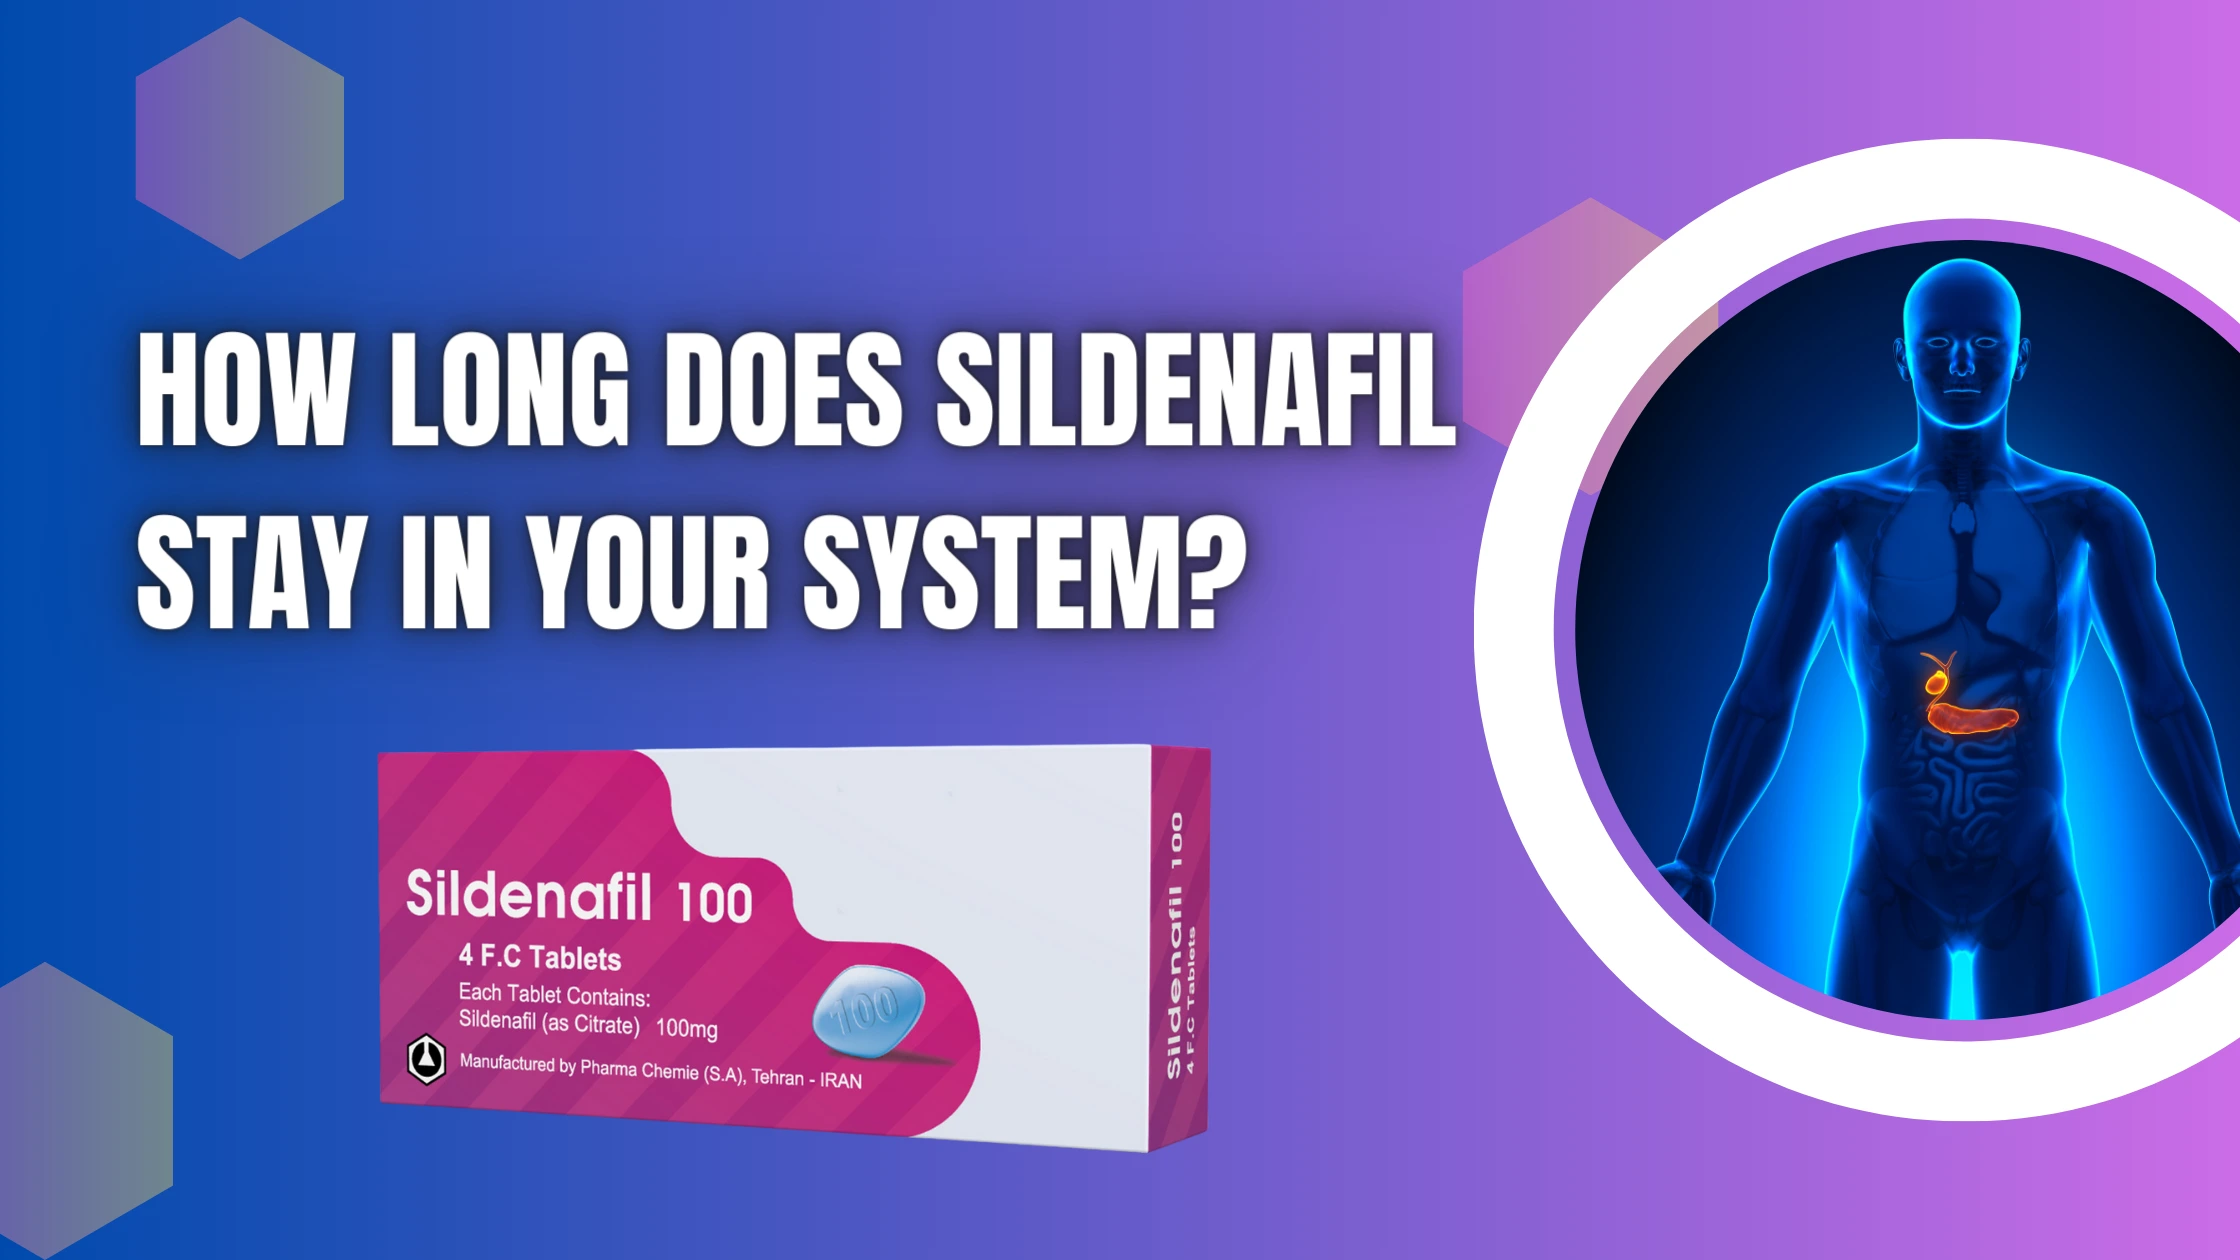 How long does Sildenafil stay in your system?